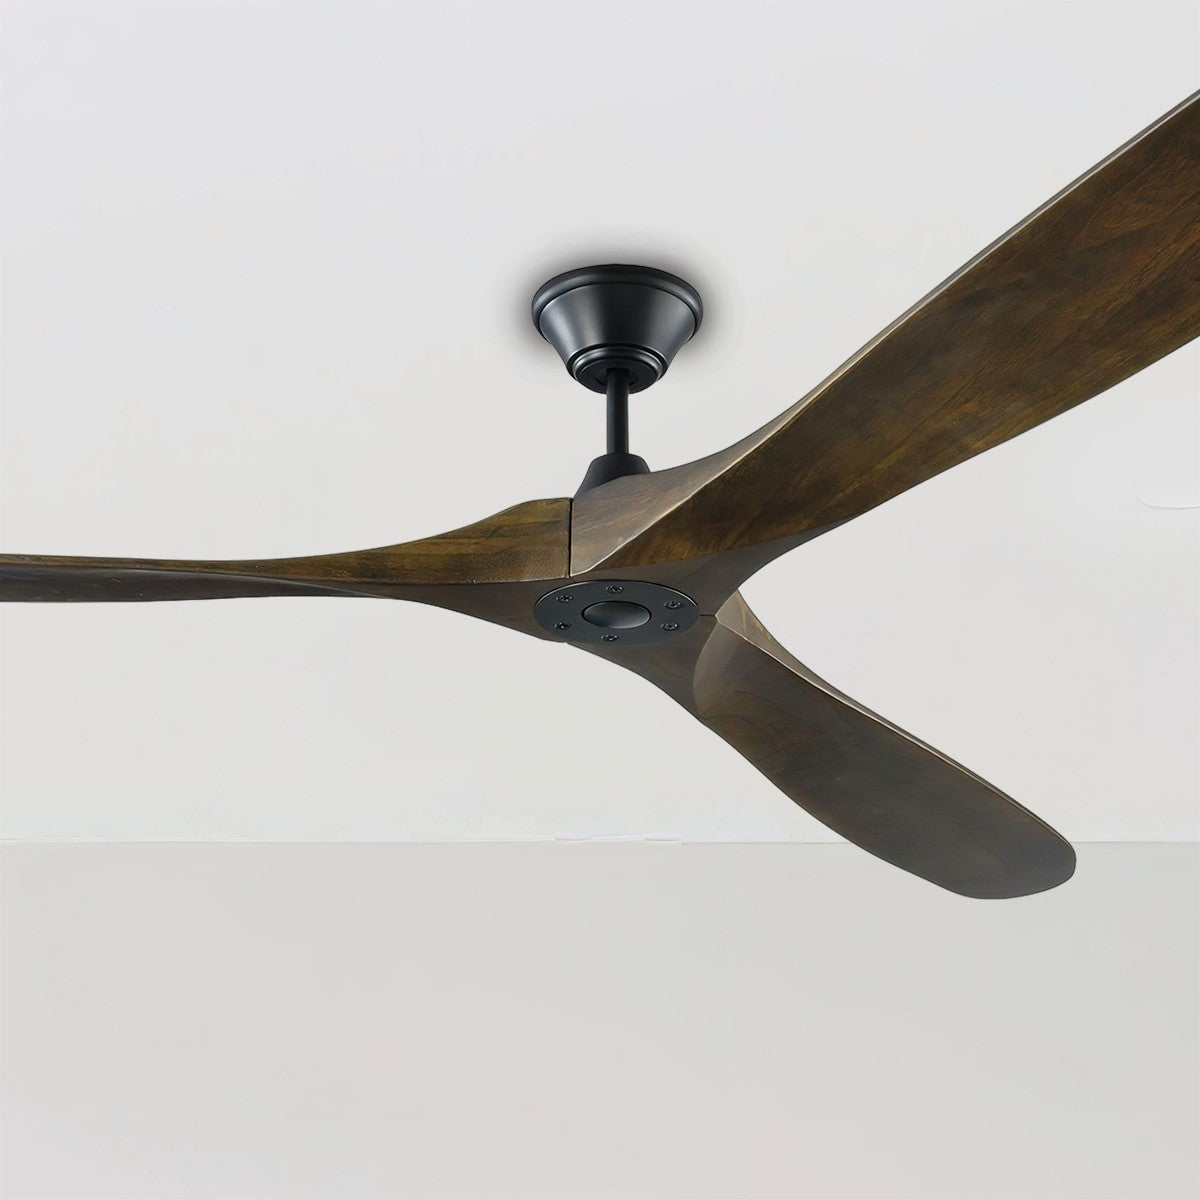 Maverick Super Max 88 Inch 3 Blades Large Outdoor Ceiling Fan With Remote